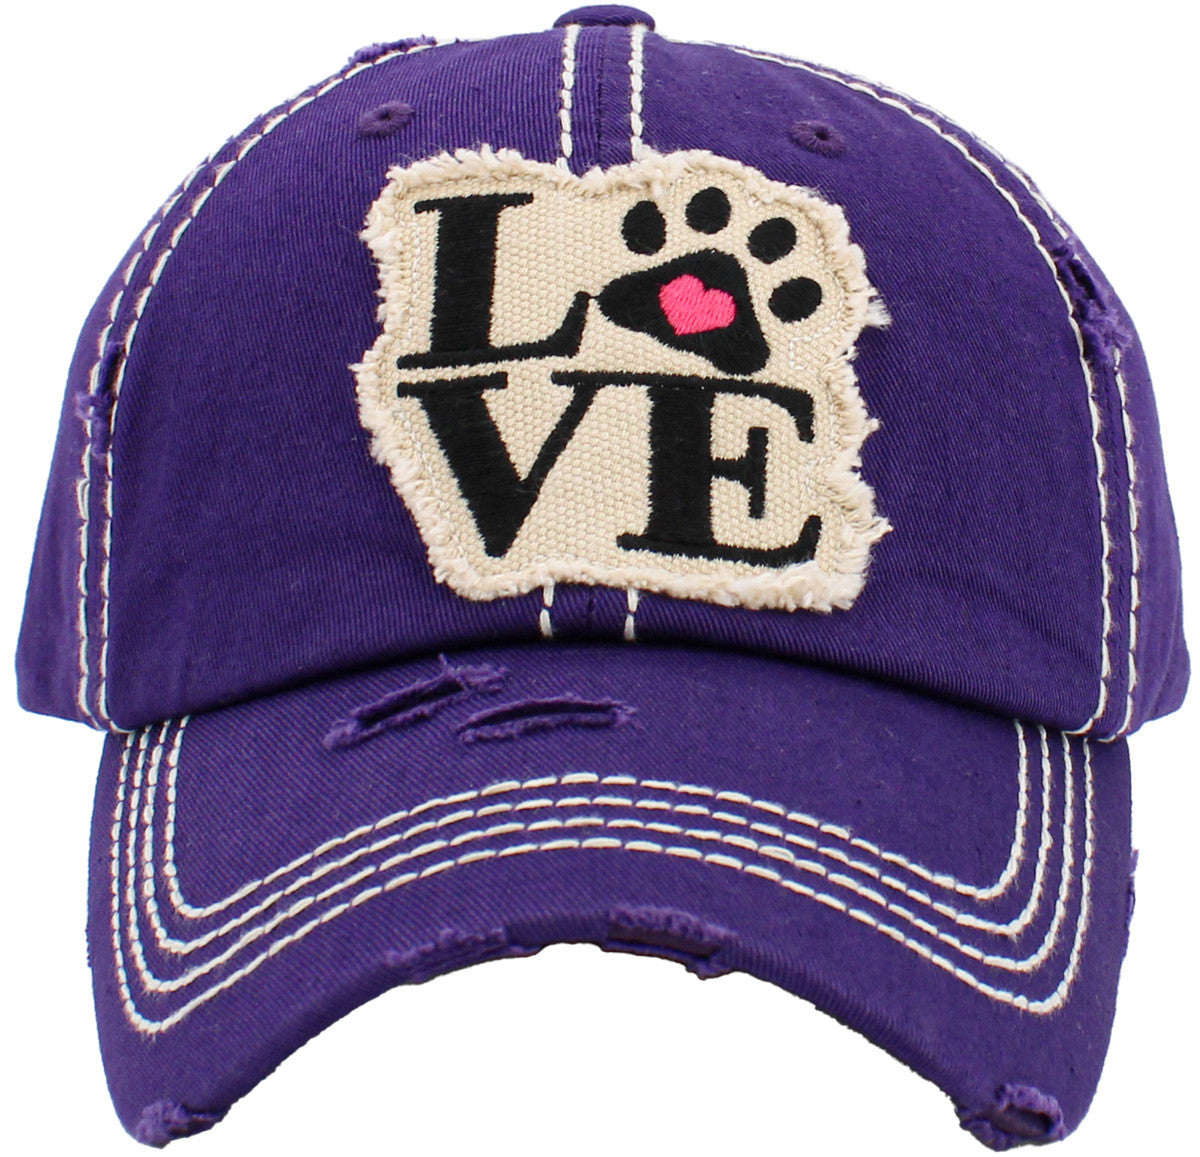 Love Paw Hats Love Animals Hats Dogs & Cats - 2 Colors